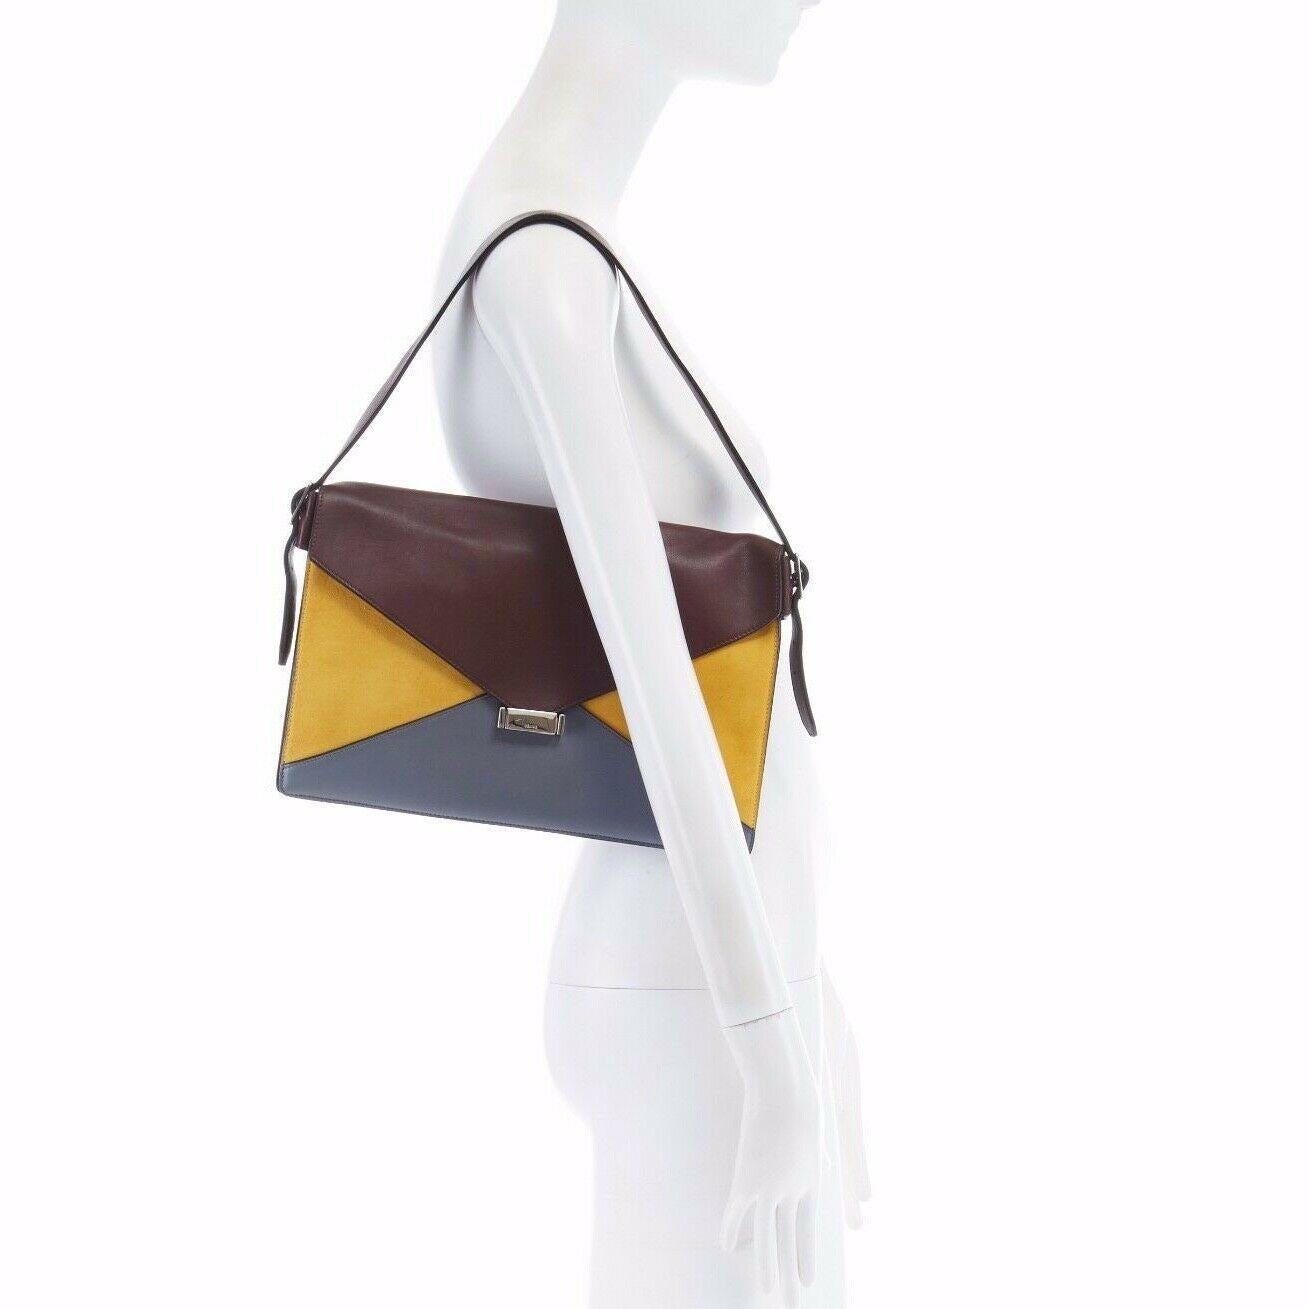 CELINE PHOEBE PHILO Diamond burgundy yellow leather shoulder clutch bag

CELINE by PHOEBE PHILO
Diamond shoulder bag . Burgundy-brown and blue-grey calfskin leather against mustard yellow suede color-blocked diamond pattern at front . Mirrored